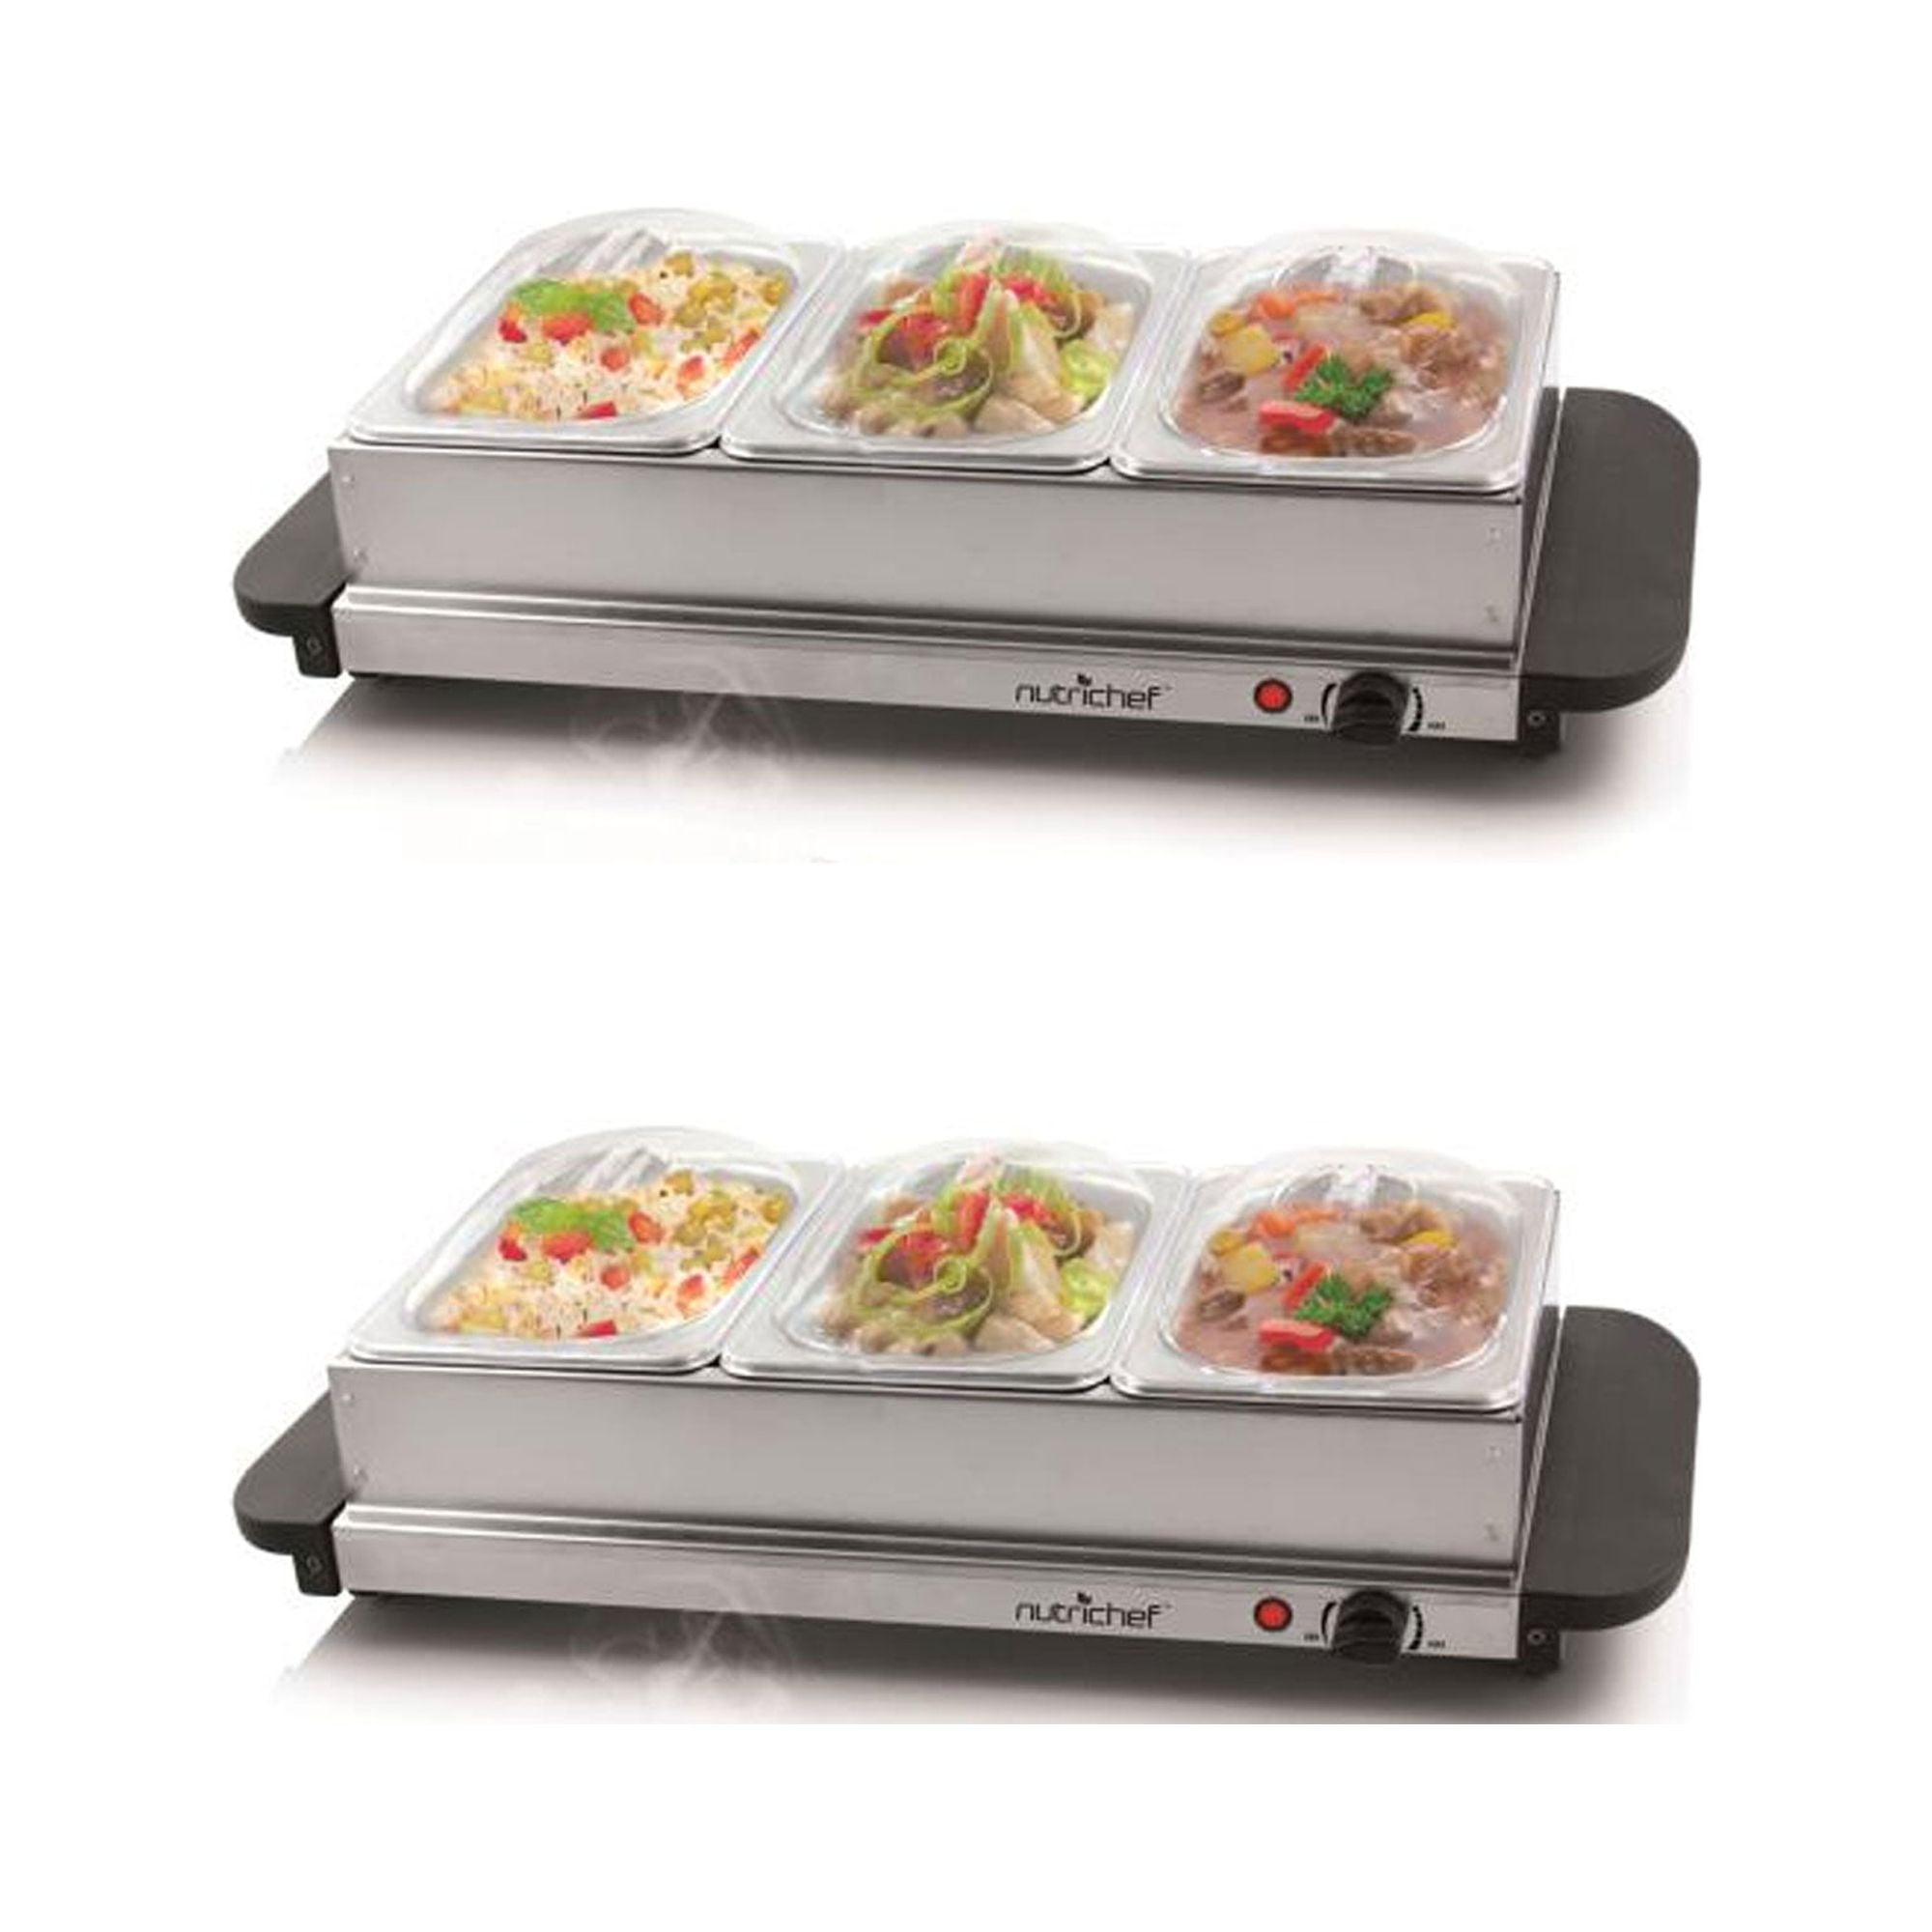 GaRcan Buffet Servers and Heaters - Food Heaters for Party Buffets,  Stainless Steel Hot Pot Buffet Sets, Hot Plate Buffet Sets, Food Heaters  for